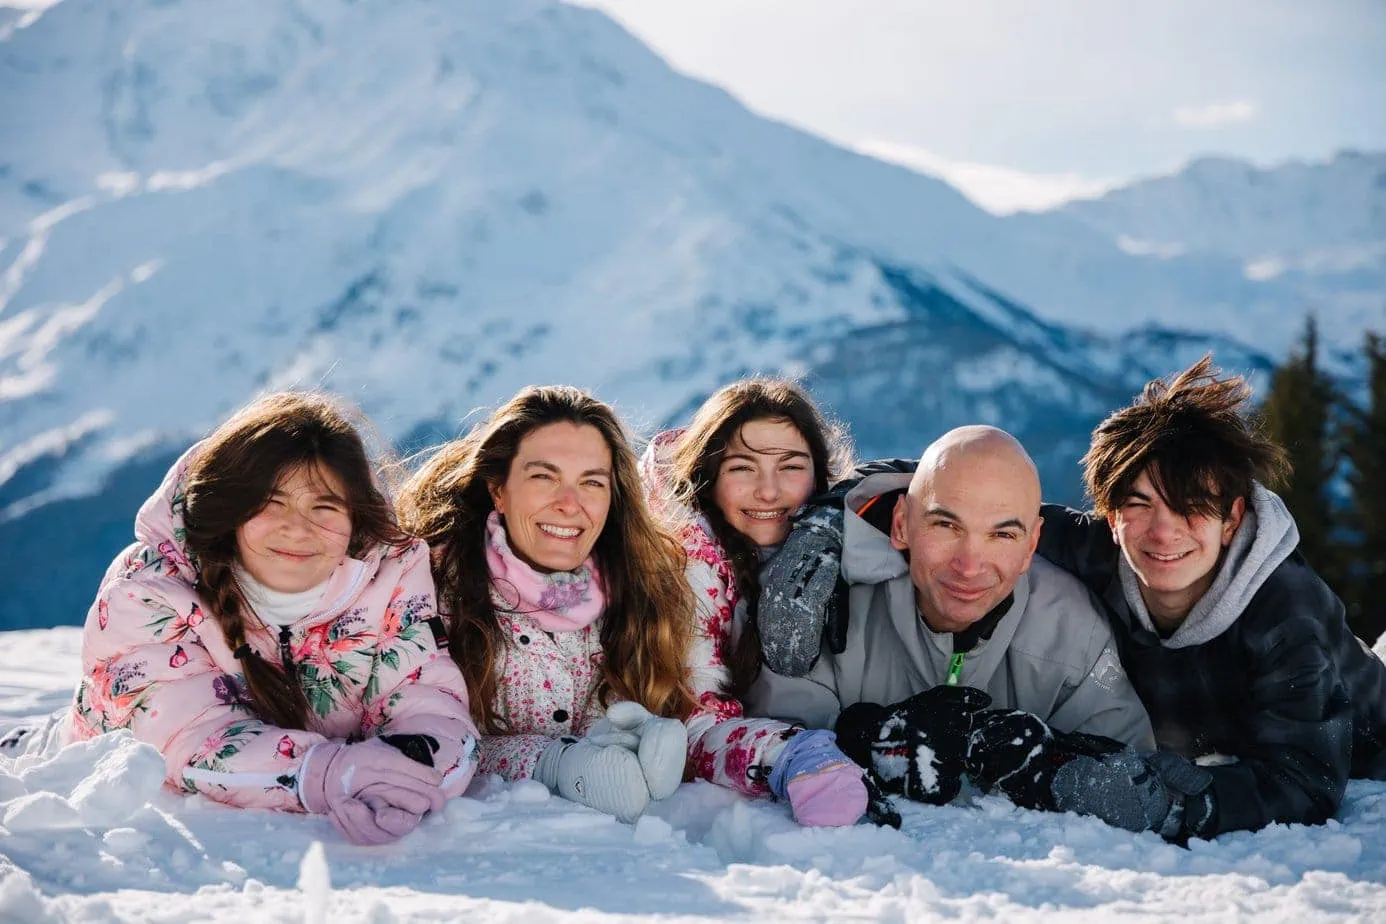 Cute family pose on French alps ski strip with snowy mountains background